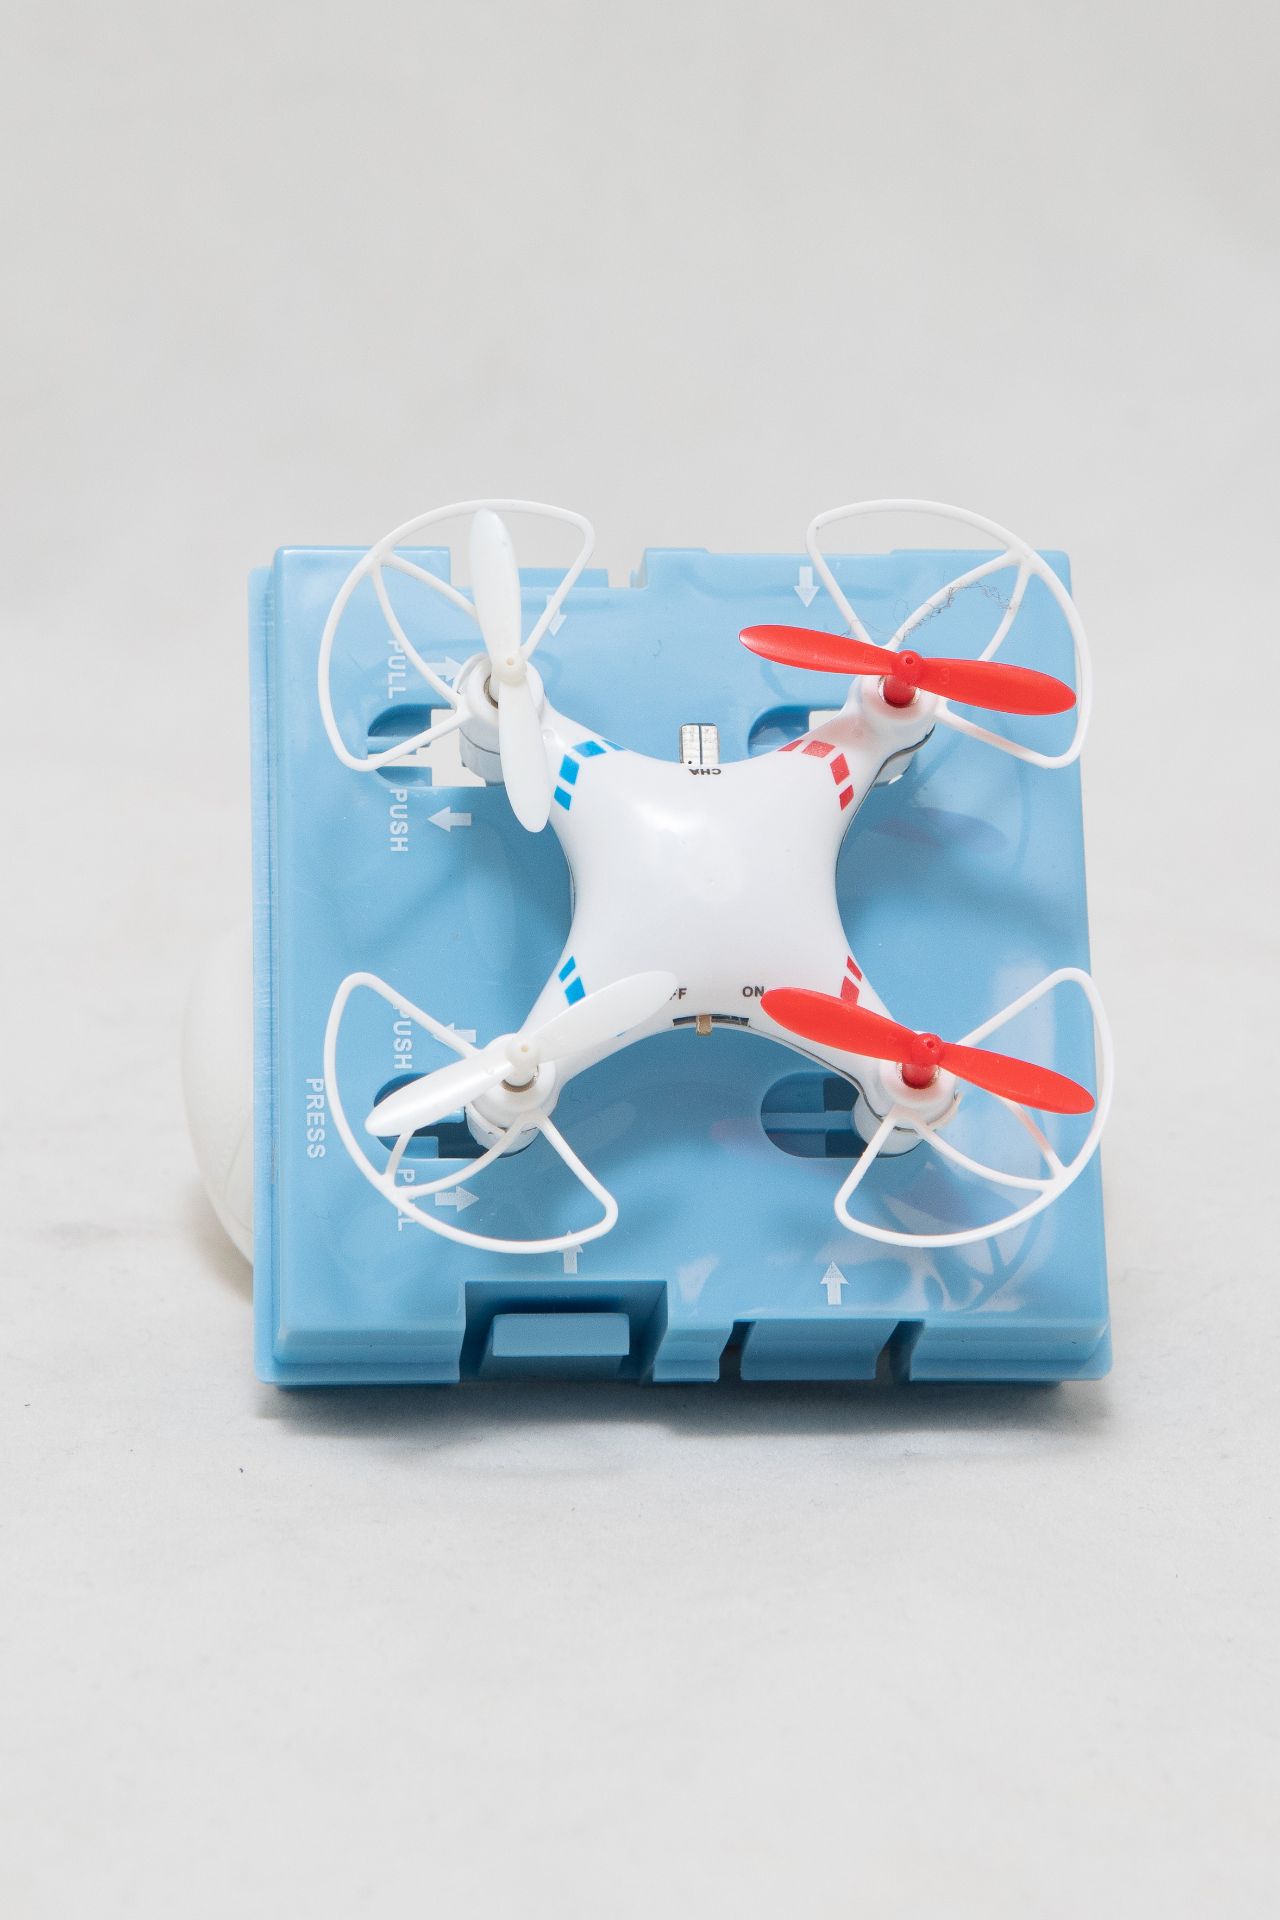 24 X BRAND NEW MINI QUADCOPTERS WITH GYROSCOPE - RRP APPROX £350 - Image 10 of 10